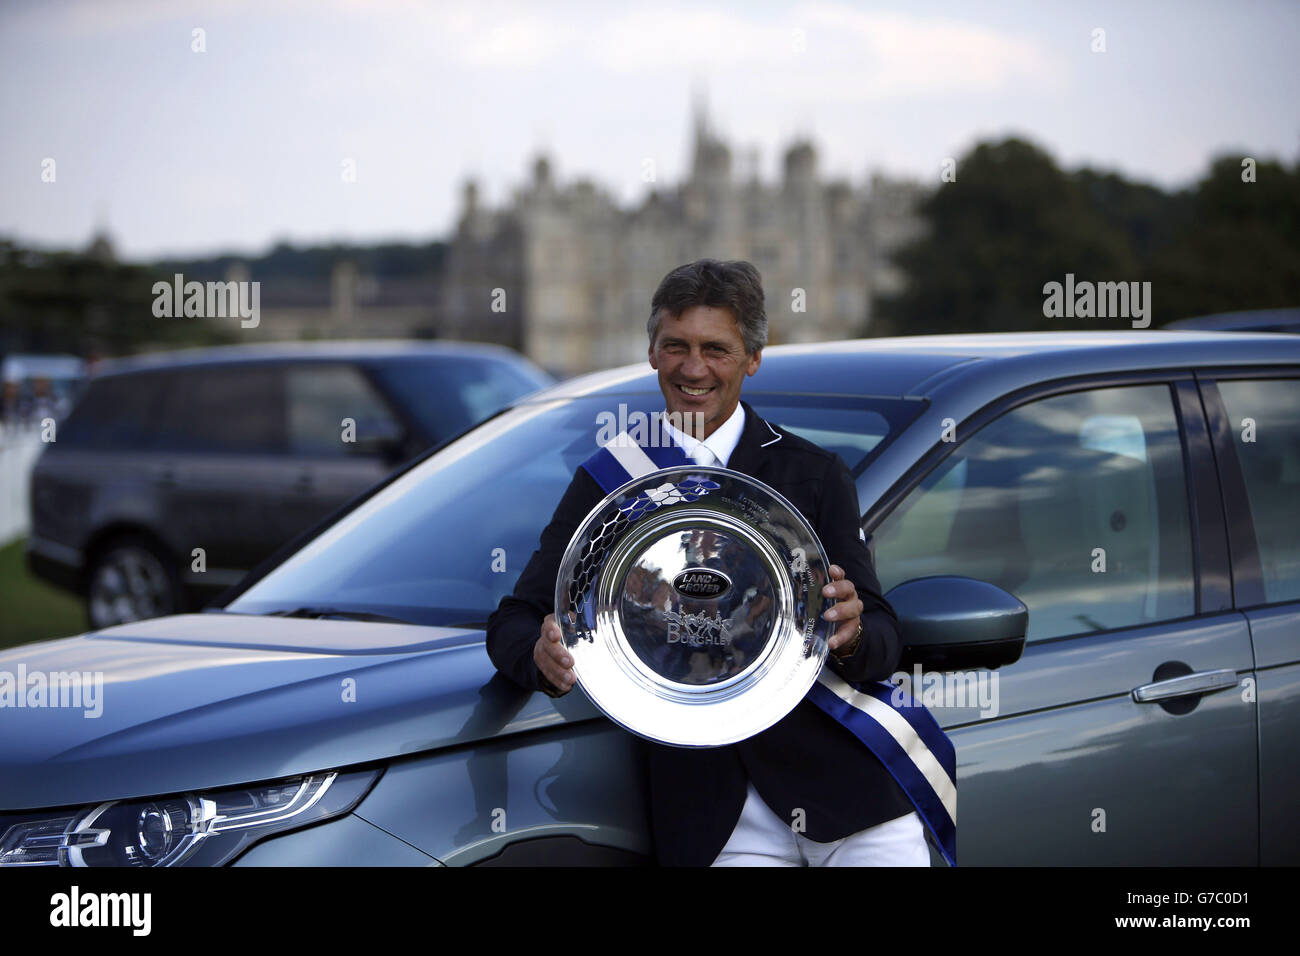 New Zealand's Andrew Nicholson poses with the trophy after winning the 2014 Land Rover Burghley Horse Trials at Burghley Park, Stamford. Stock Photo